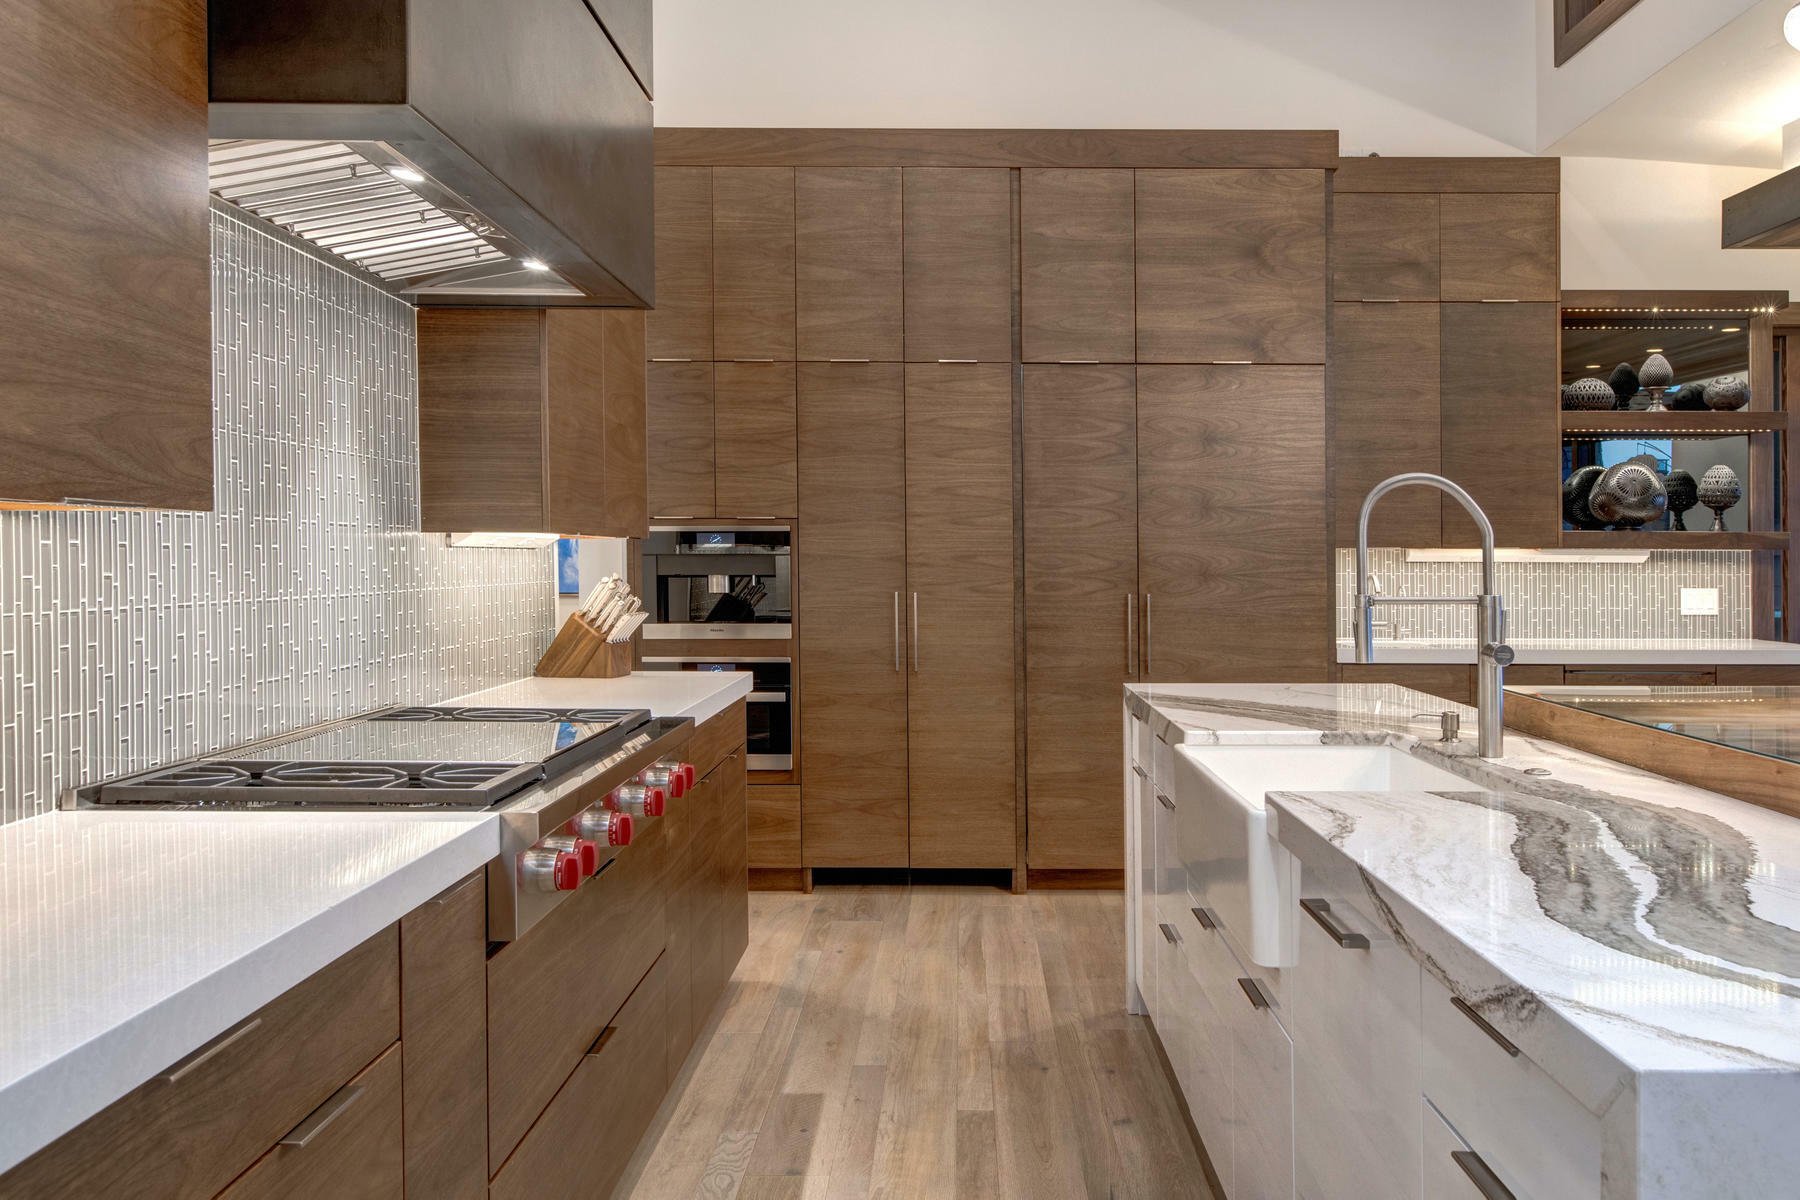 Modern kitchen with two cabinet colors. Medium brown wood with white.